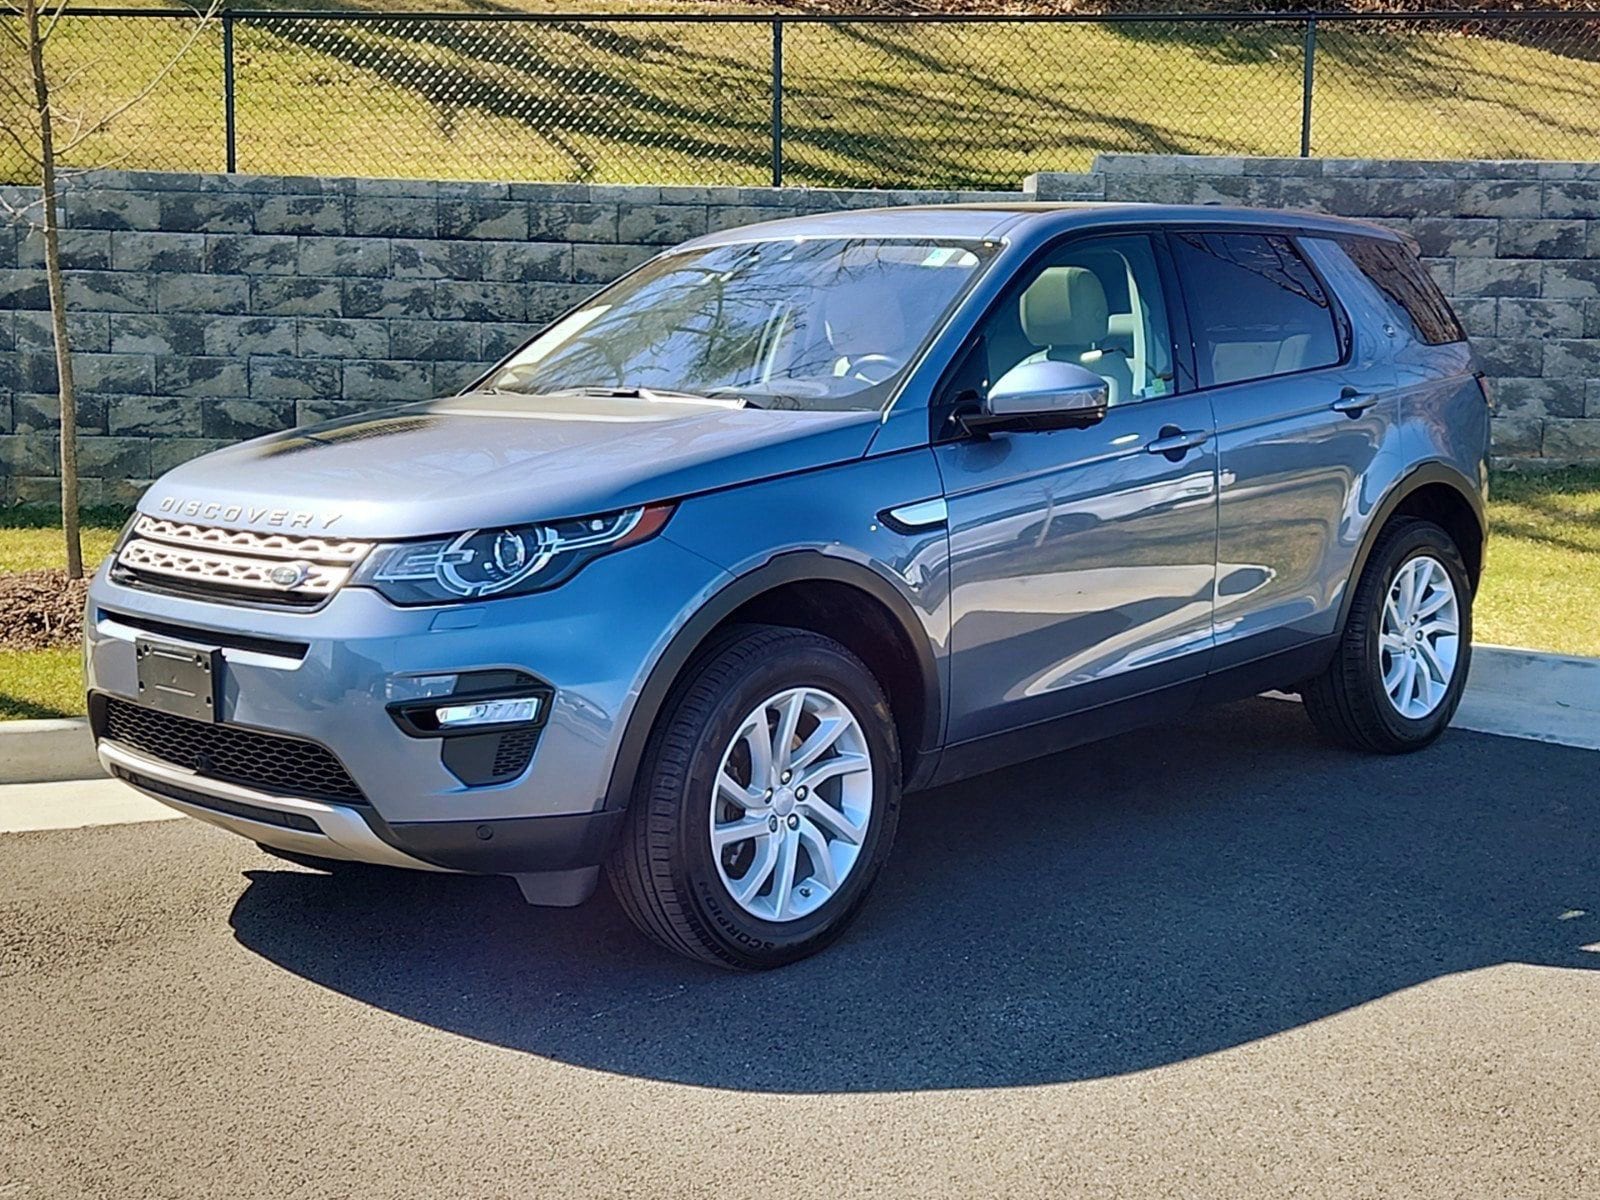 Used 2018 Land Rover Discovery Sport For Sale | Alexandria VA | VIN:  SALCR2RX1JH729800